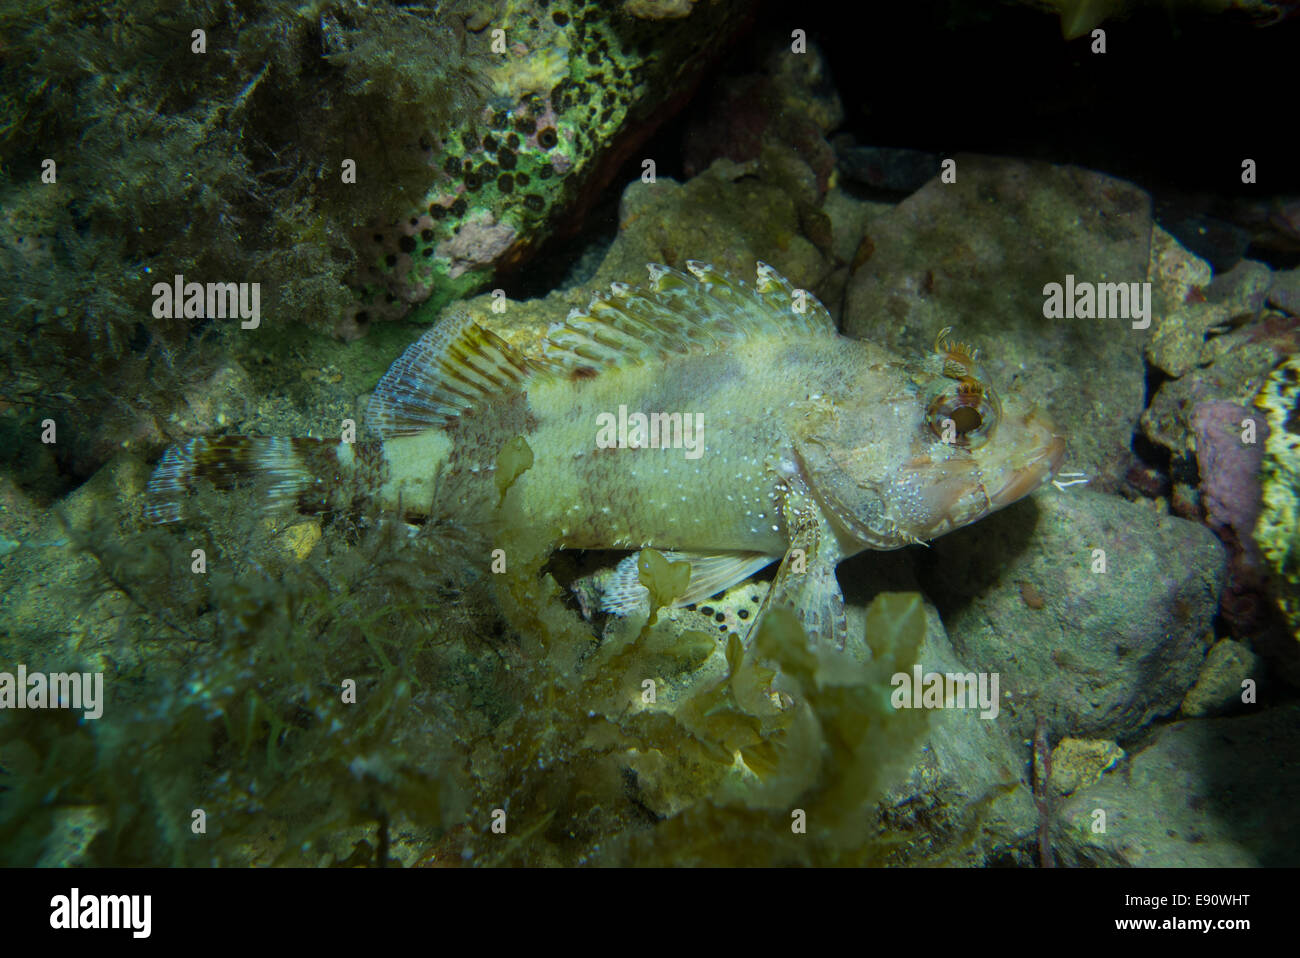 Small Rockfish, Scorpaena notate, on algae covered rock. Picture was taken in Malta. Stock Photo